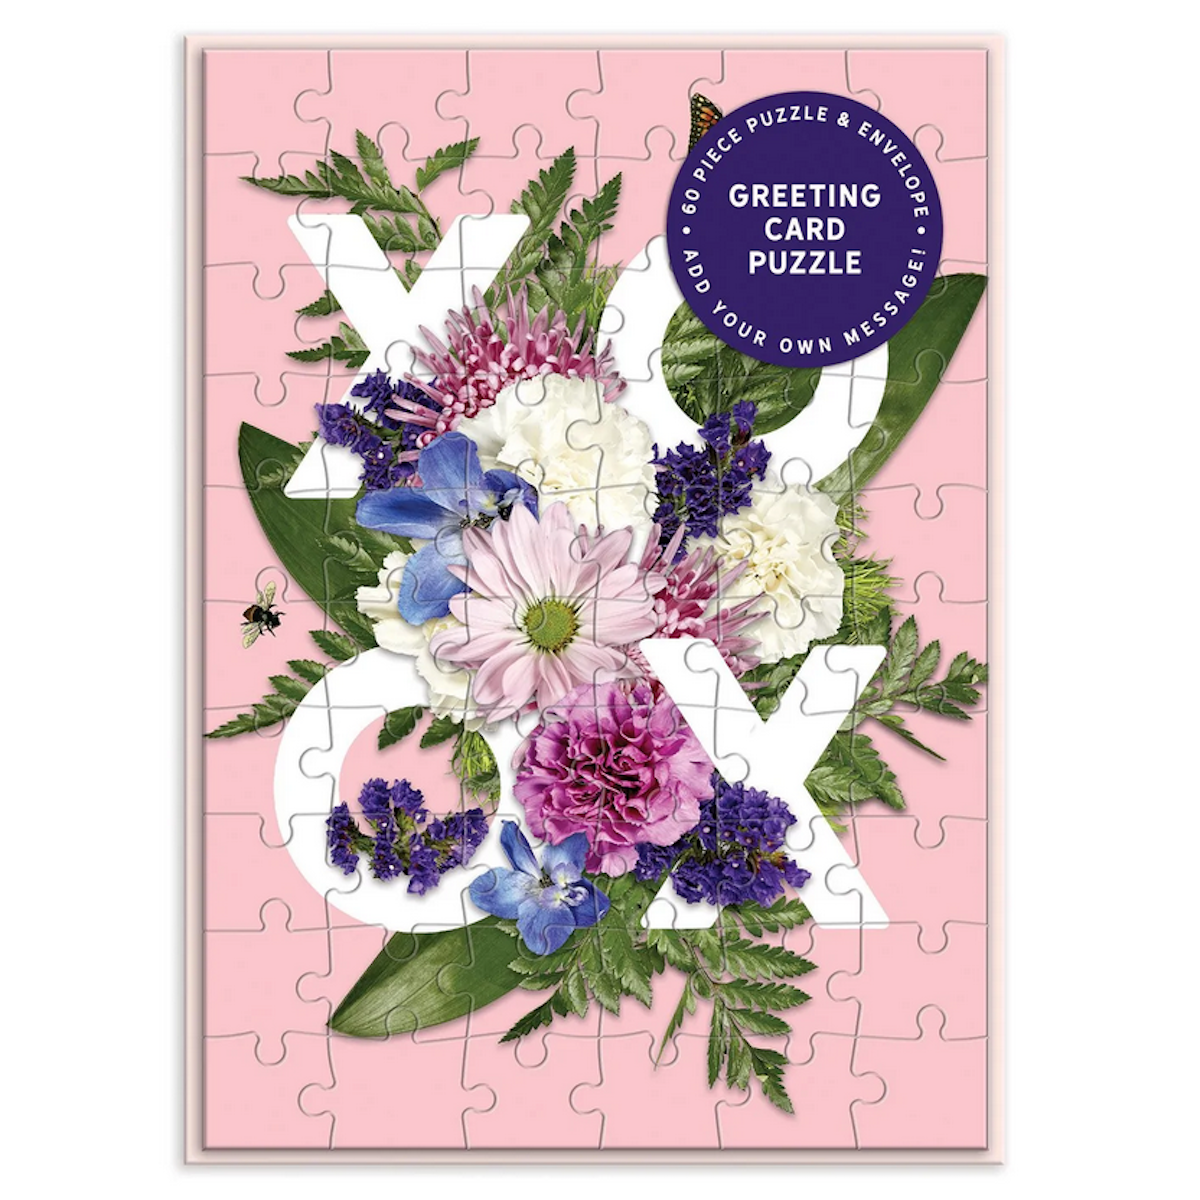 Say it with Flowers XO Greeting Card & Puzzle 60pcs